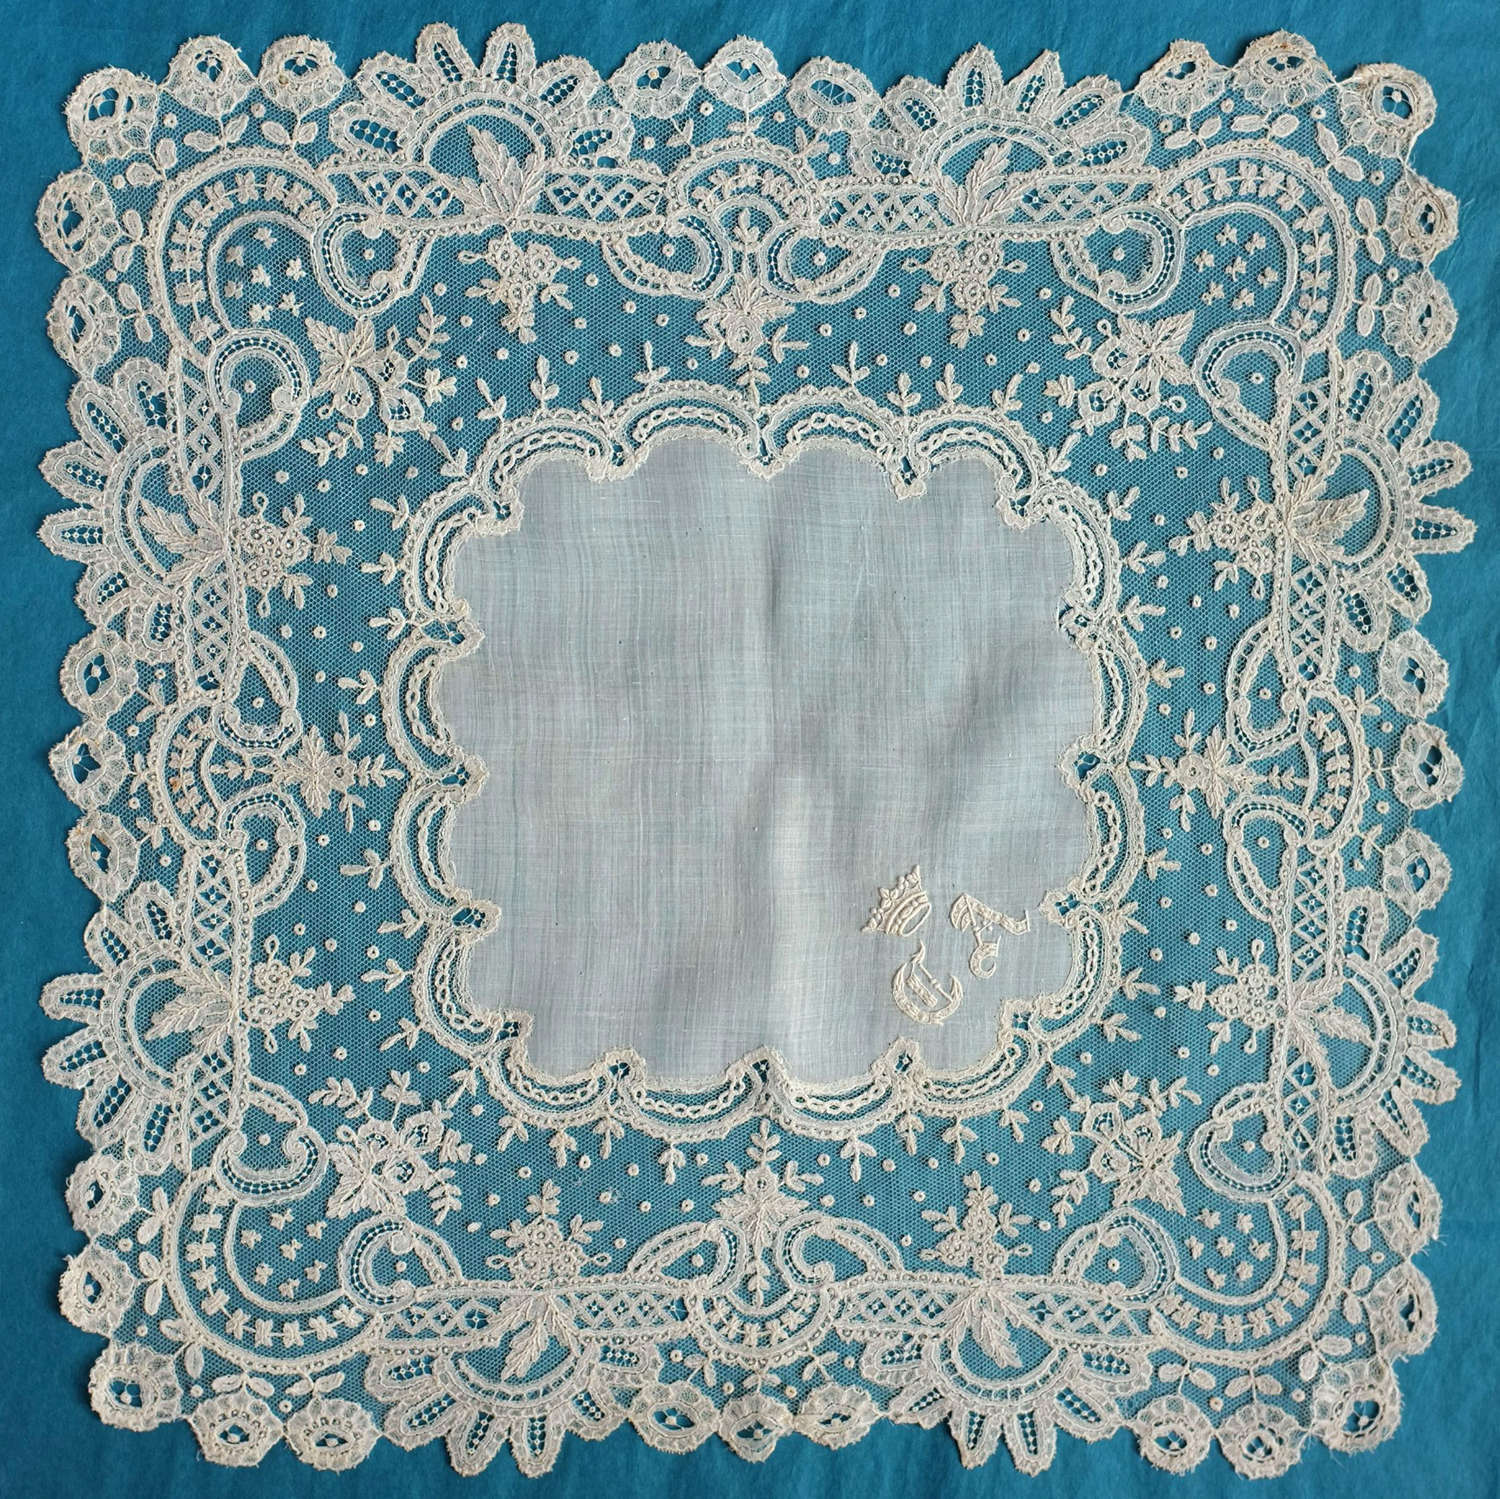 19th Century Brussels Lace Handkerchief with Coronet and Monogram